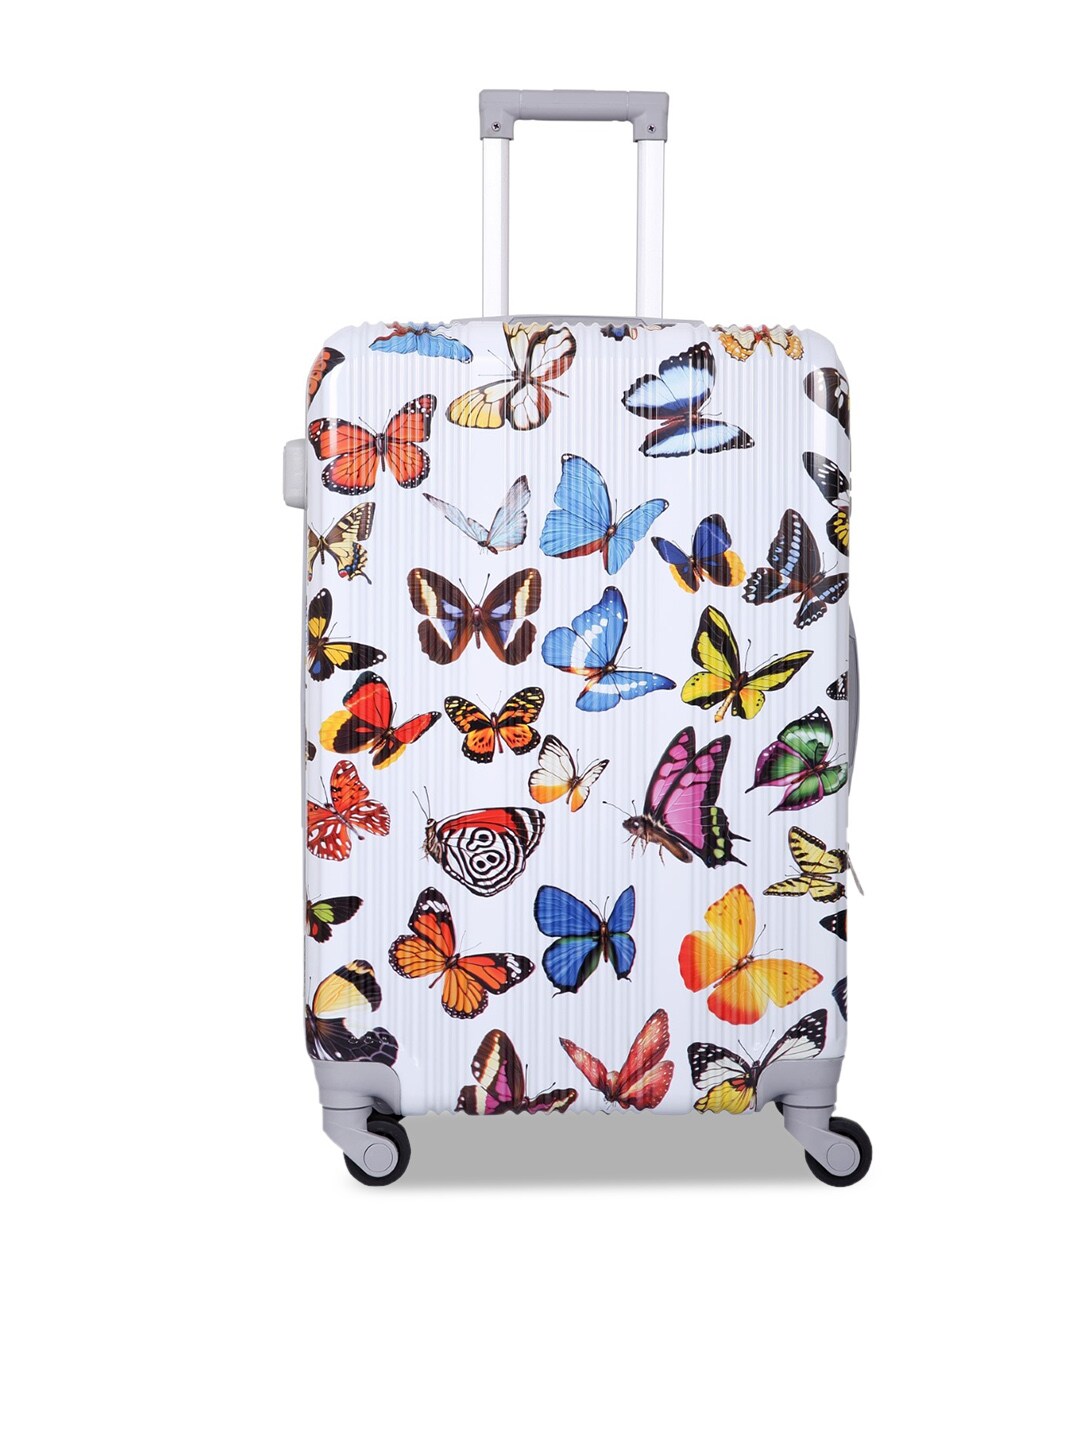 Polo Class Multicolored Printed Trolley Bag- 24 inch Price in India